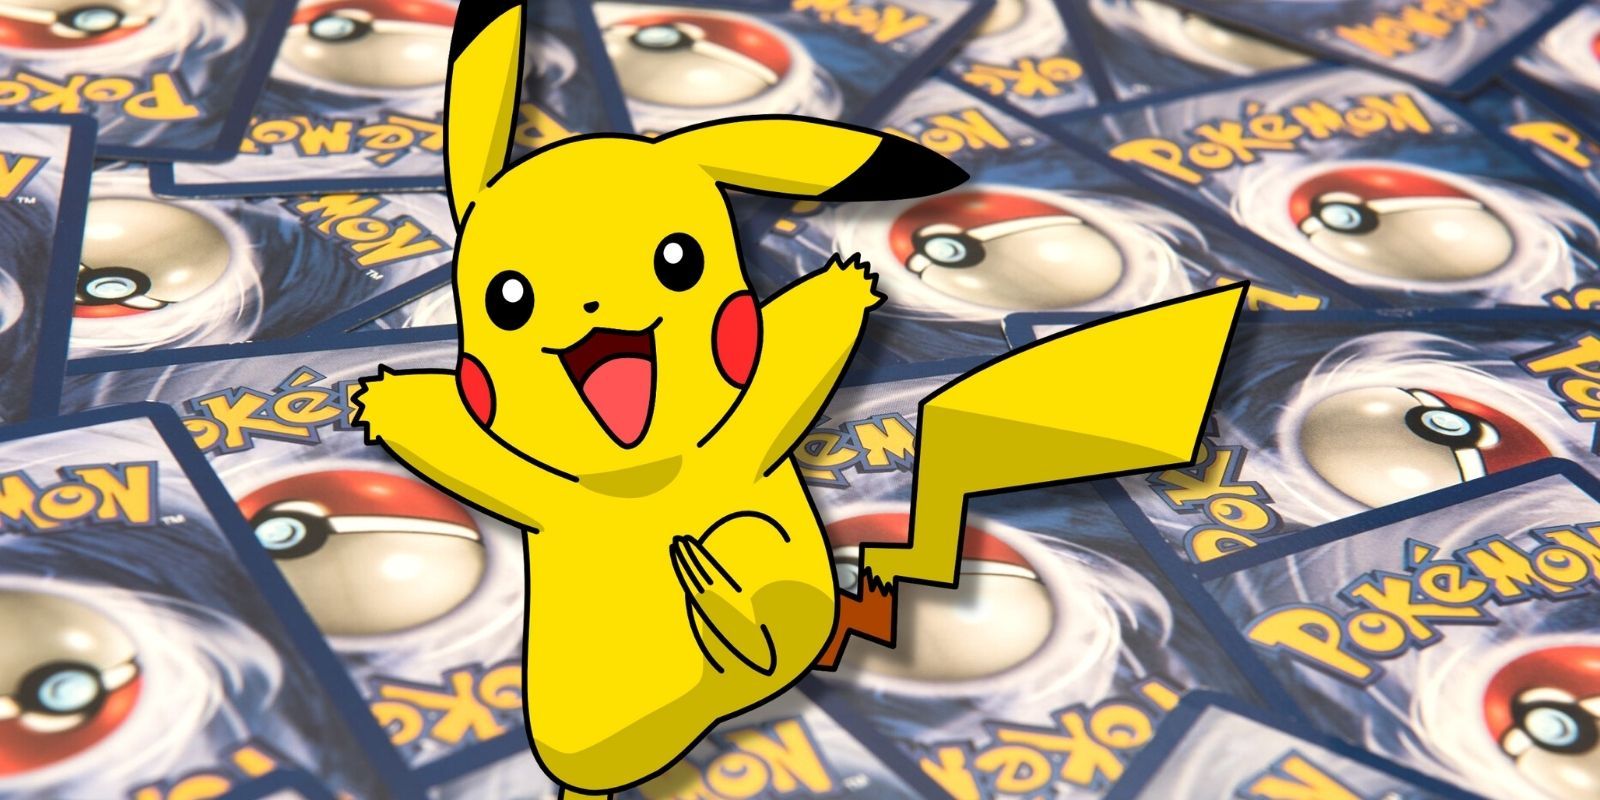 Holy Grail' of Pokemon cards selling for $100,000 on , The Independent